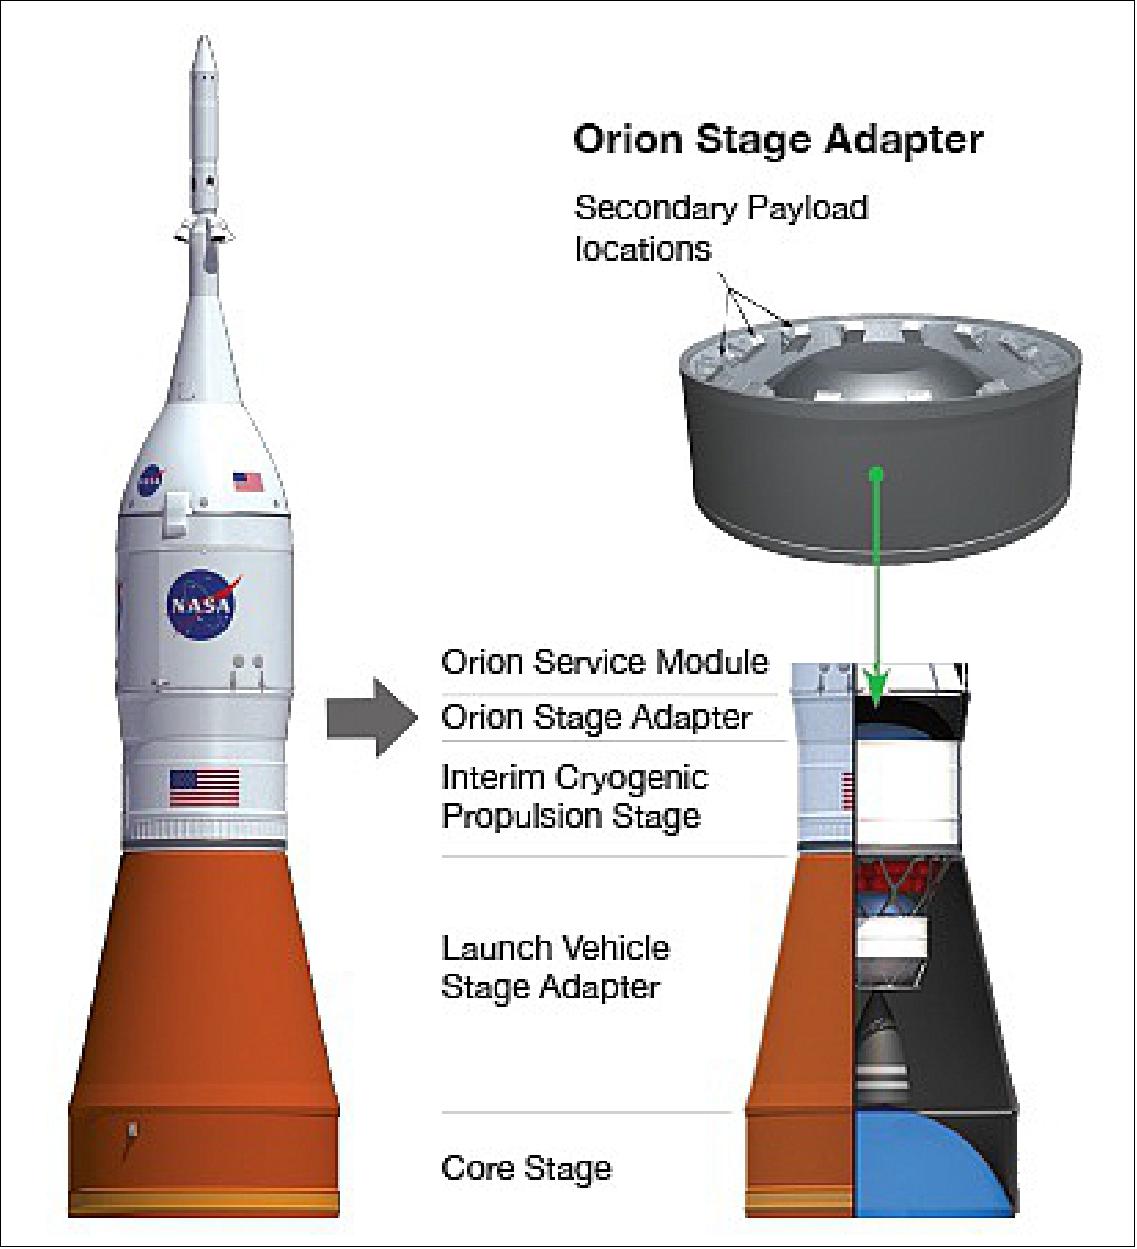 Figure 12: The CubeSats will be deployed from the Orion Stage Adapter (image credit: NASA, Ref. 13)